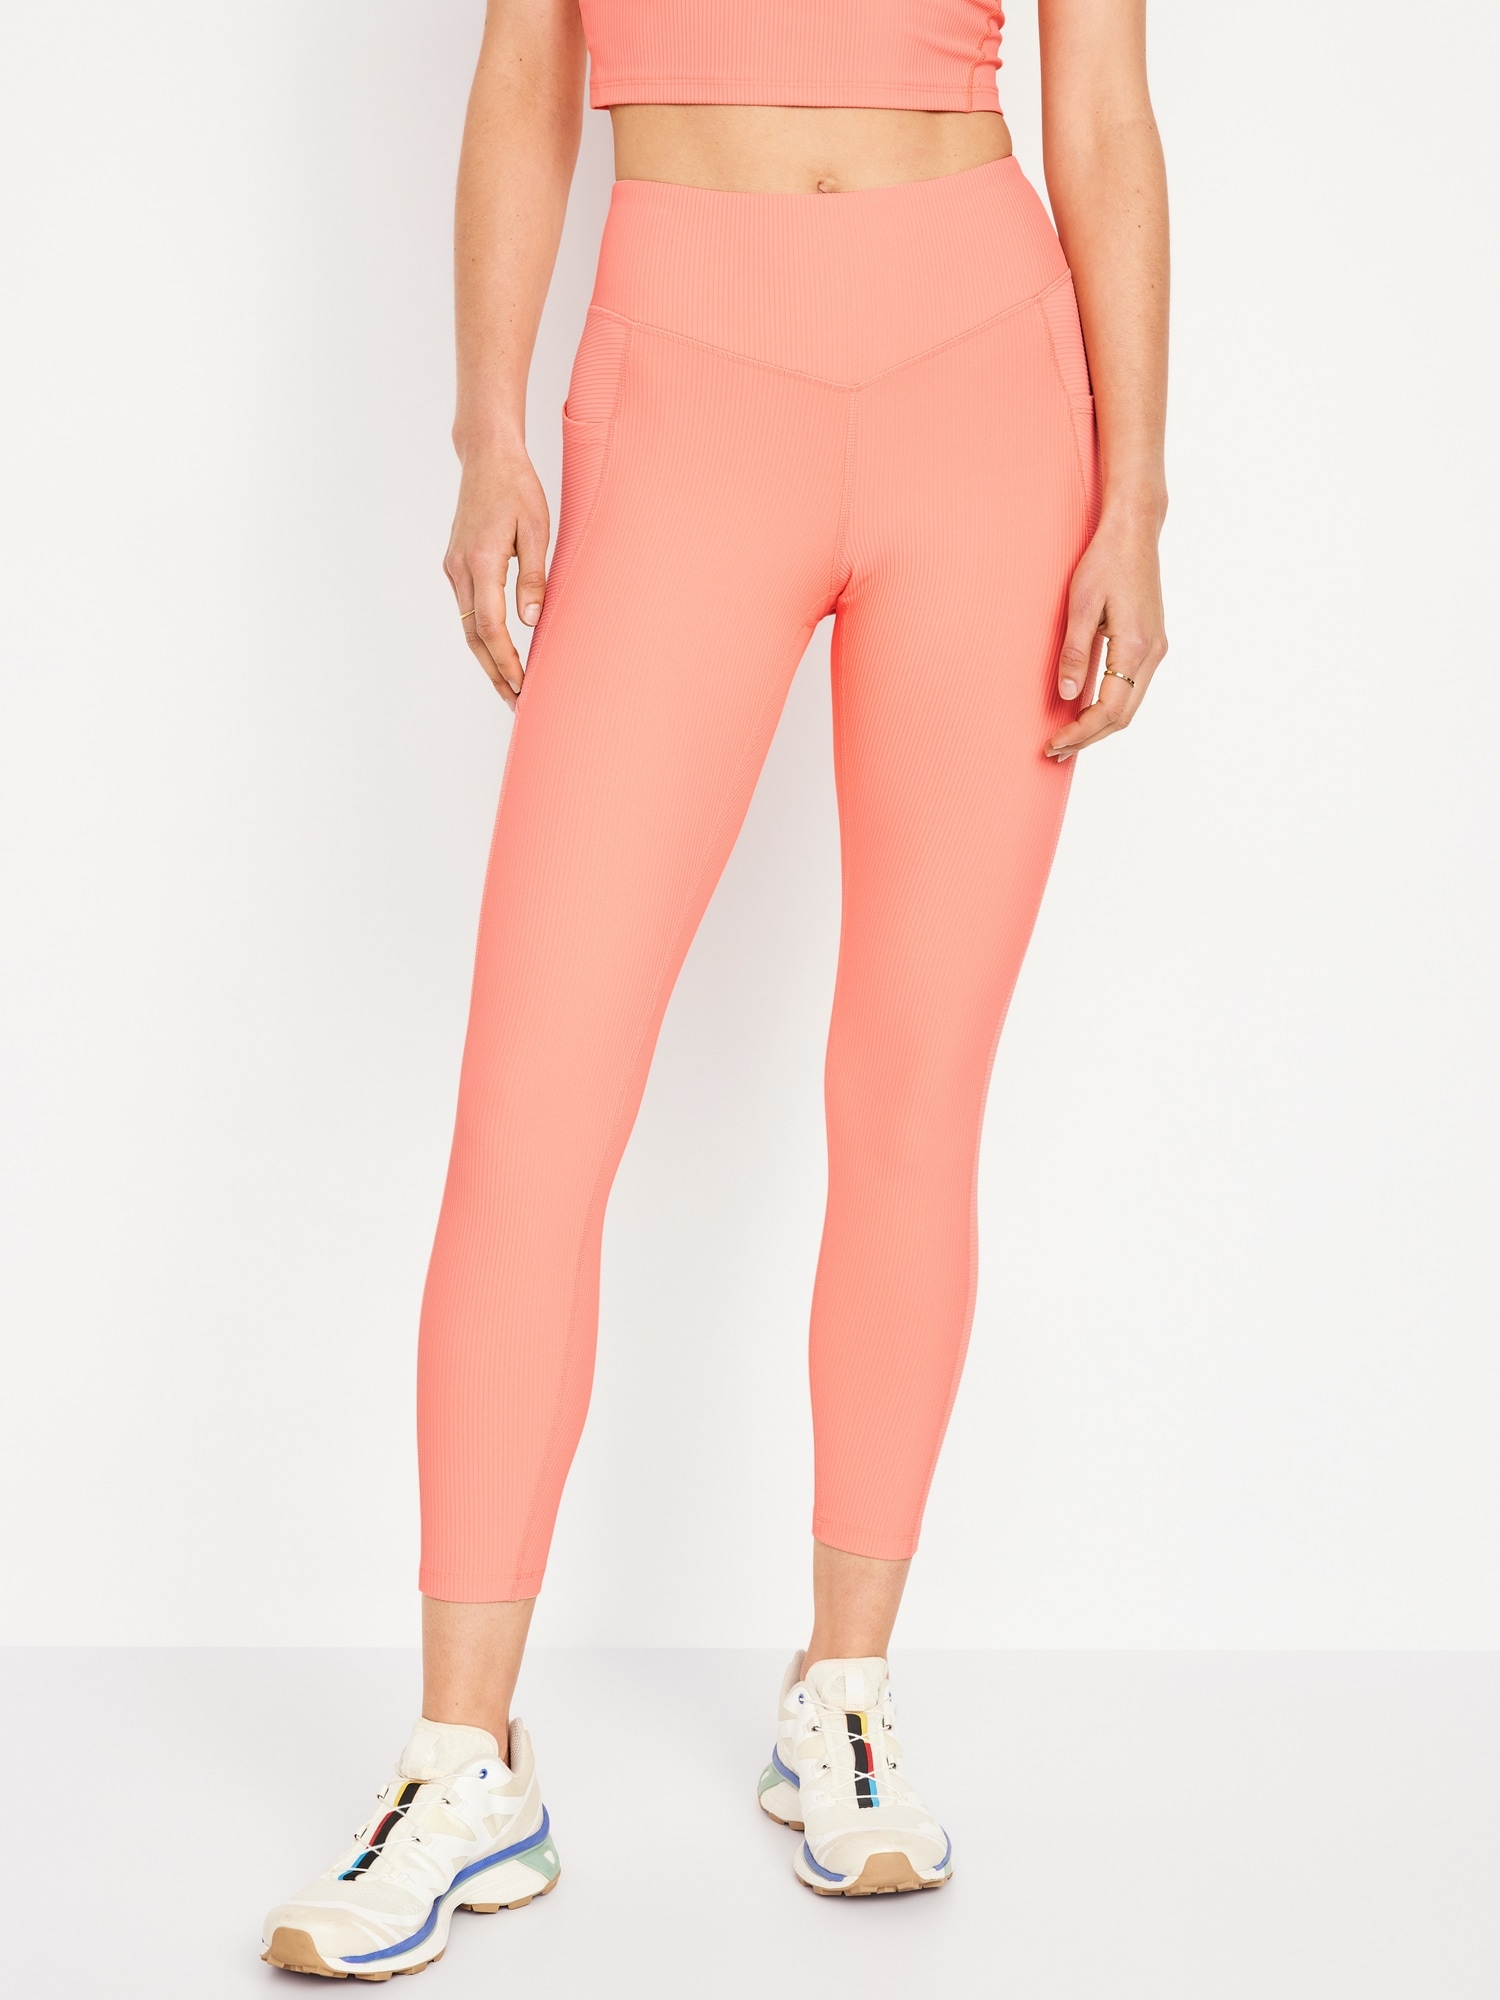 Alo Pink Space Dye High Waisted Leggings- Size XS (Inseam 24.5) – The  Saved Collection